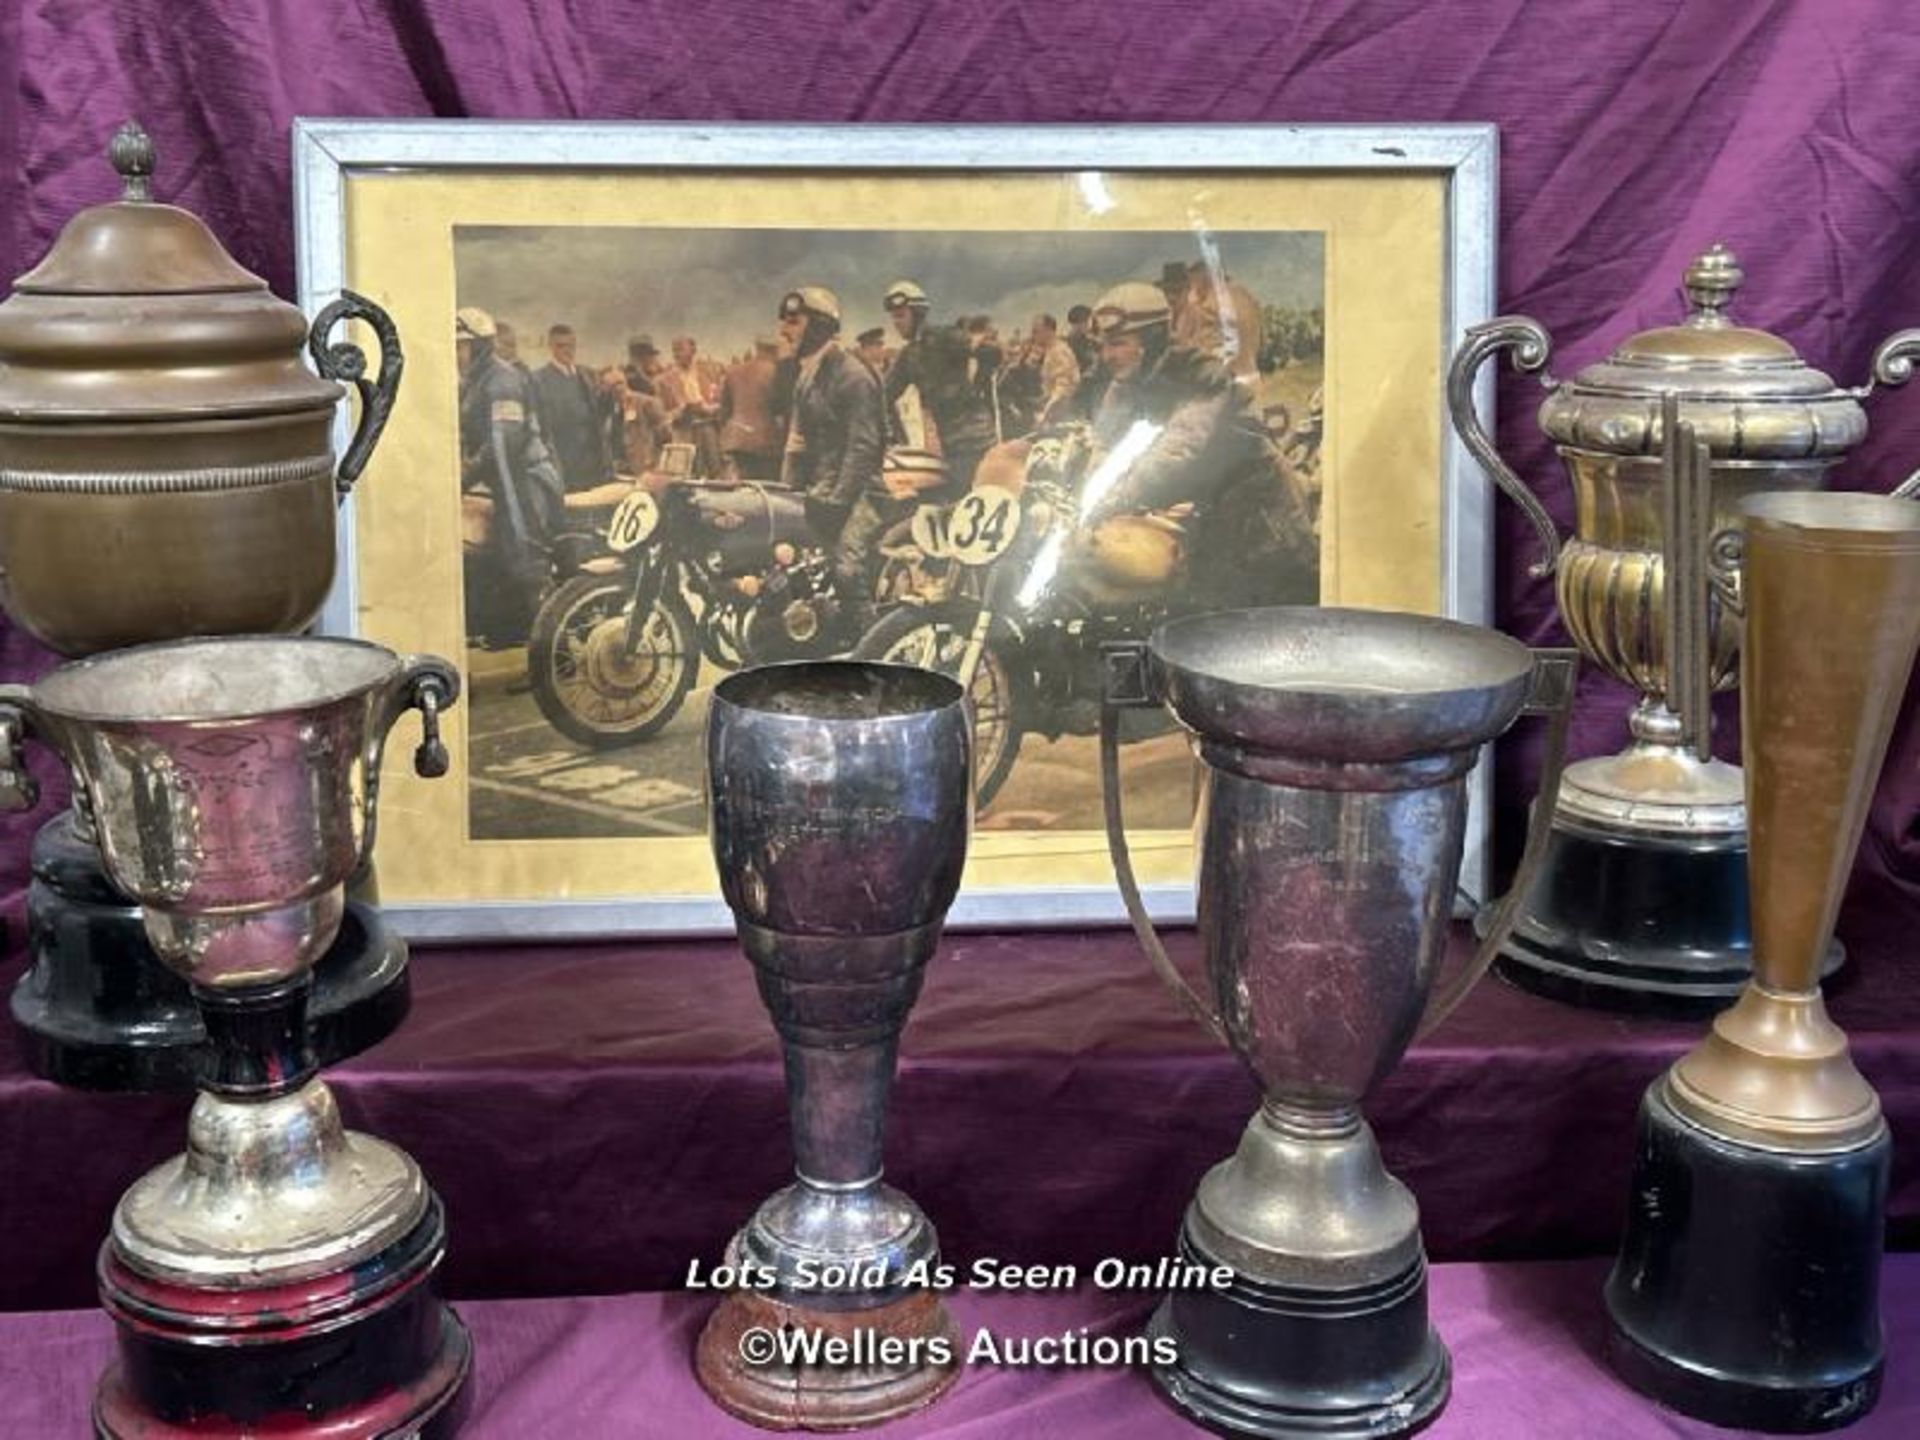 LESLIE GRAHAM (1911-1953) BRITISH ROAD MOTORCYCLE RACER - A COLLECTION OF SIX TROPHIES WON OVER